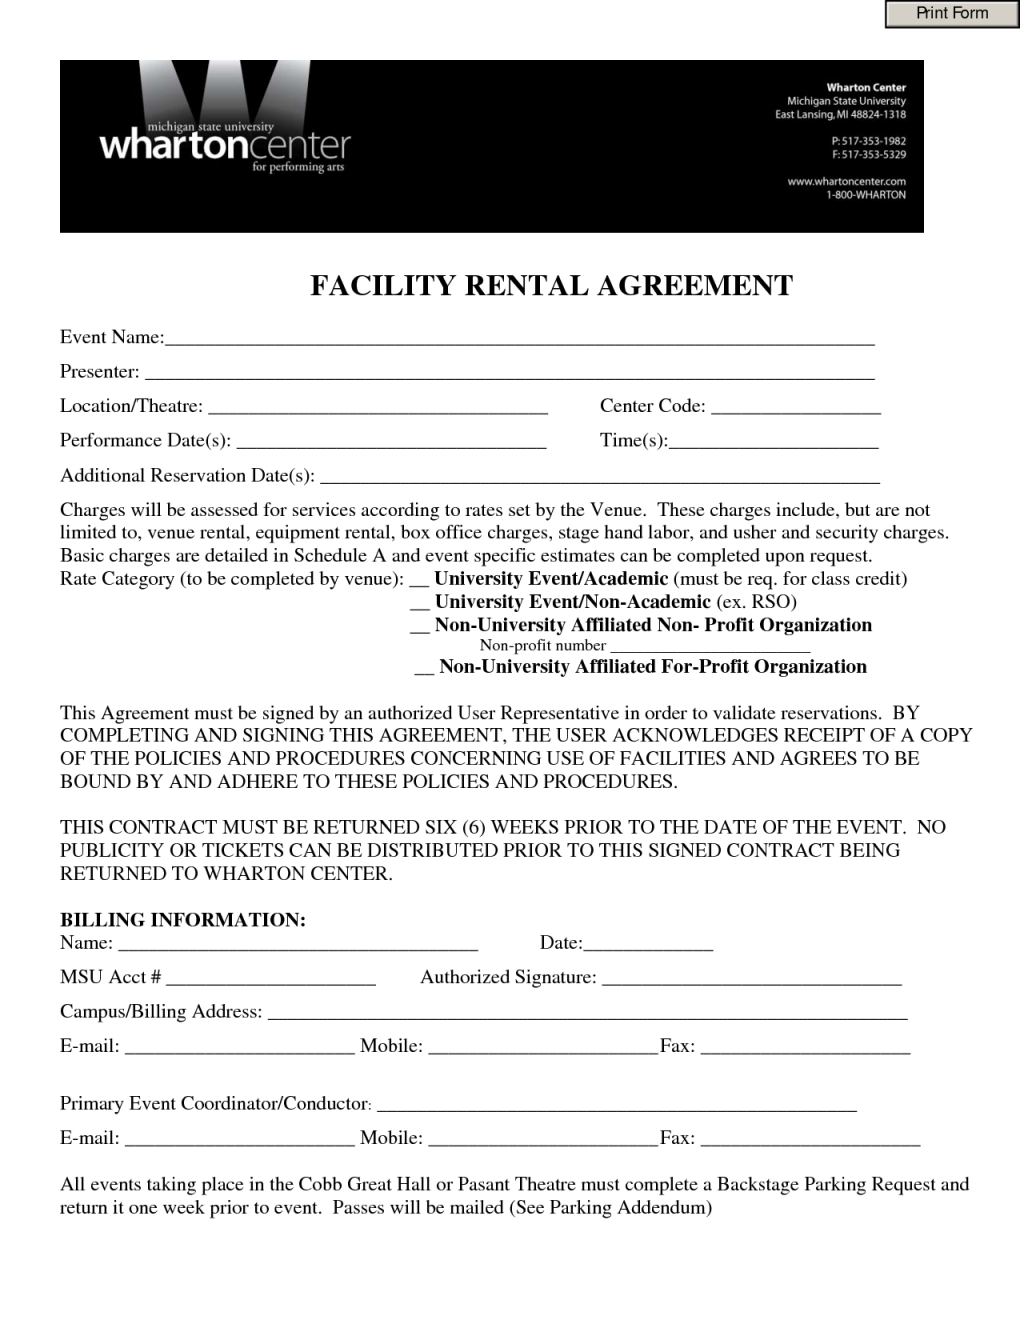 Contract Rental Agreement Template Facility Hire Agreement Template Lobo Black